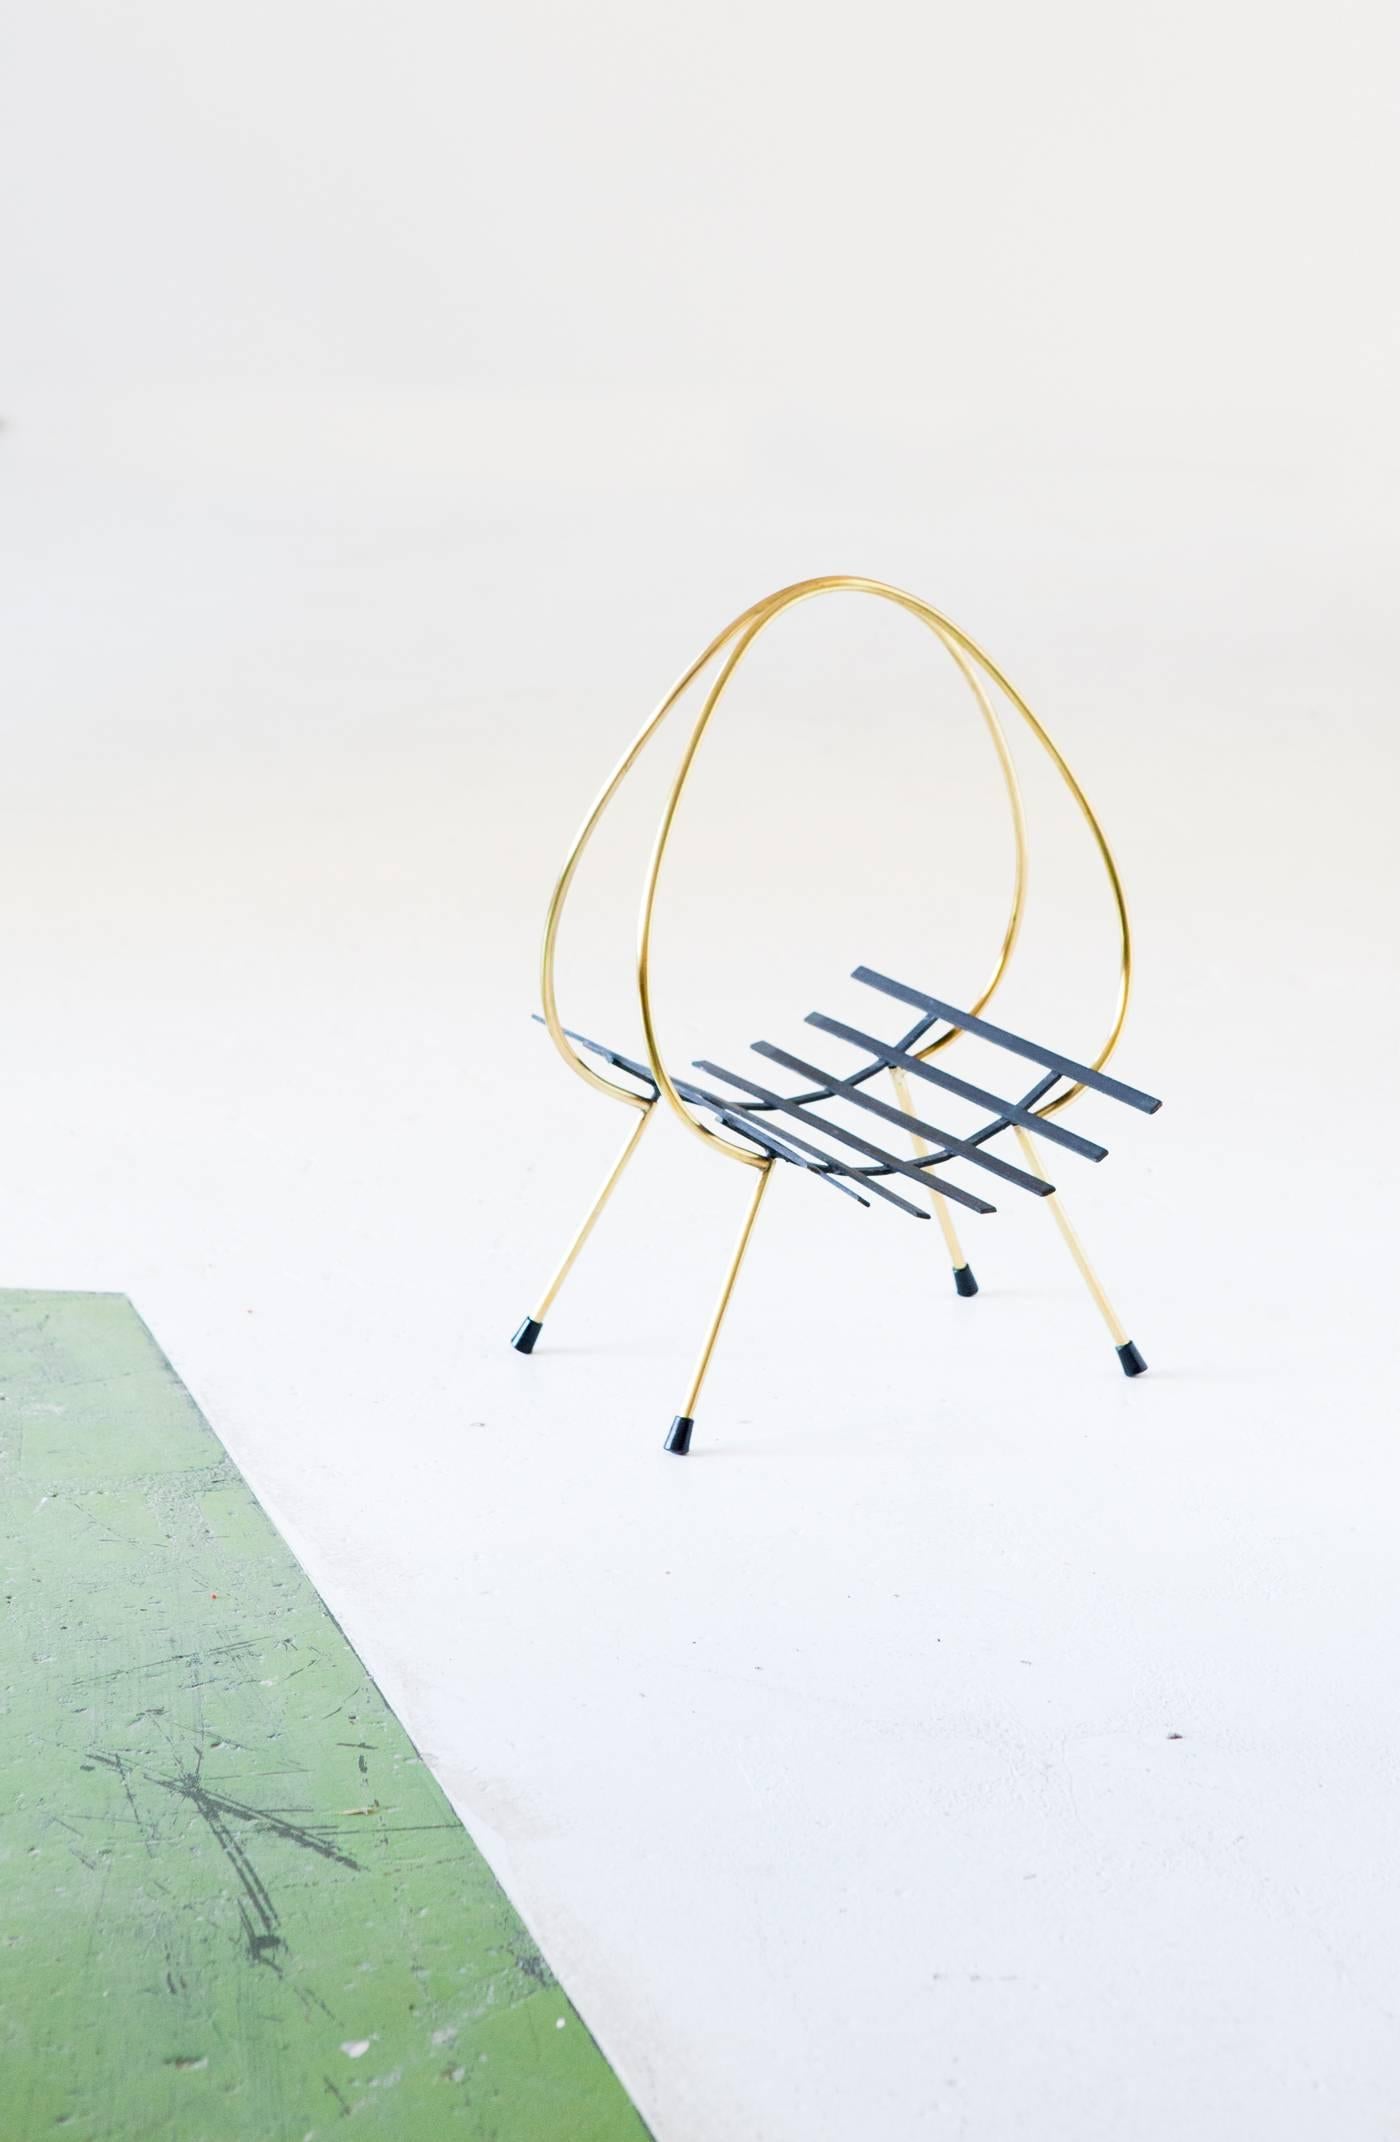 Magazine rack, manufactured in Italy in 1950s
Made of solid brass and black enameled iron
Completely restored.
 

 